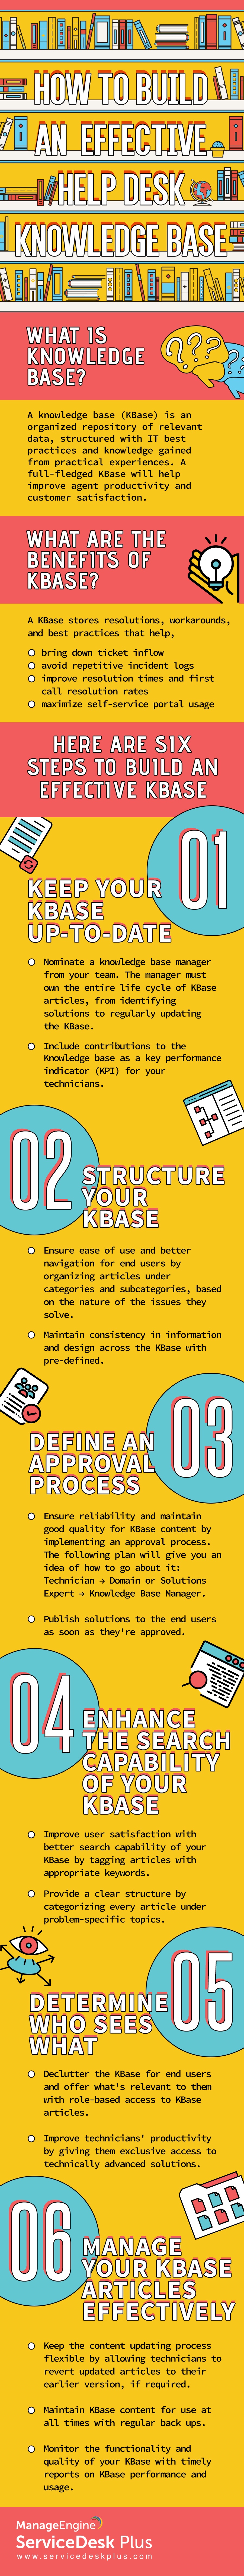 How to Build an Effective Help Desk Knowledge Base Infographic